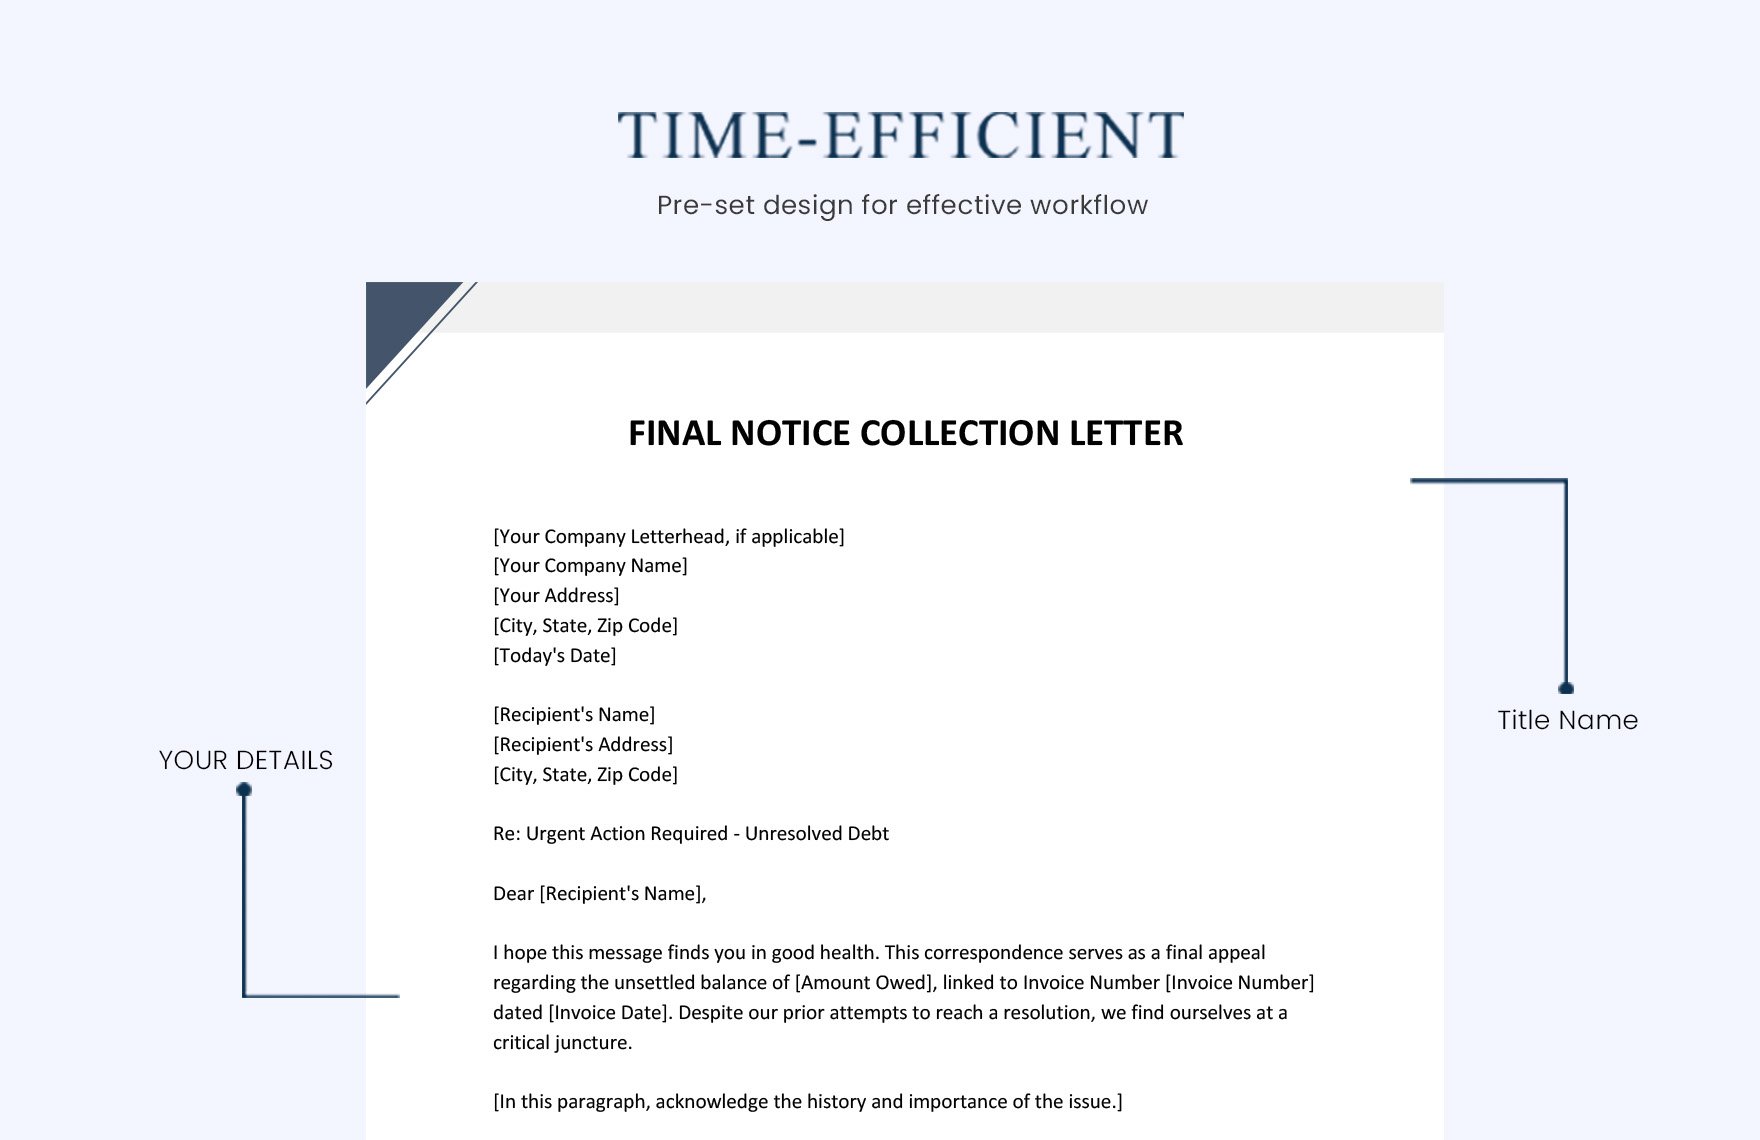 Final Notice Collection Letter